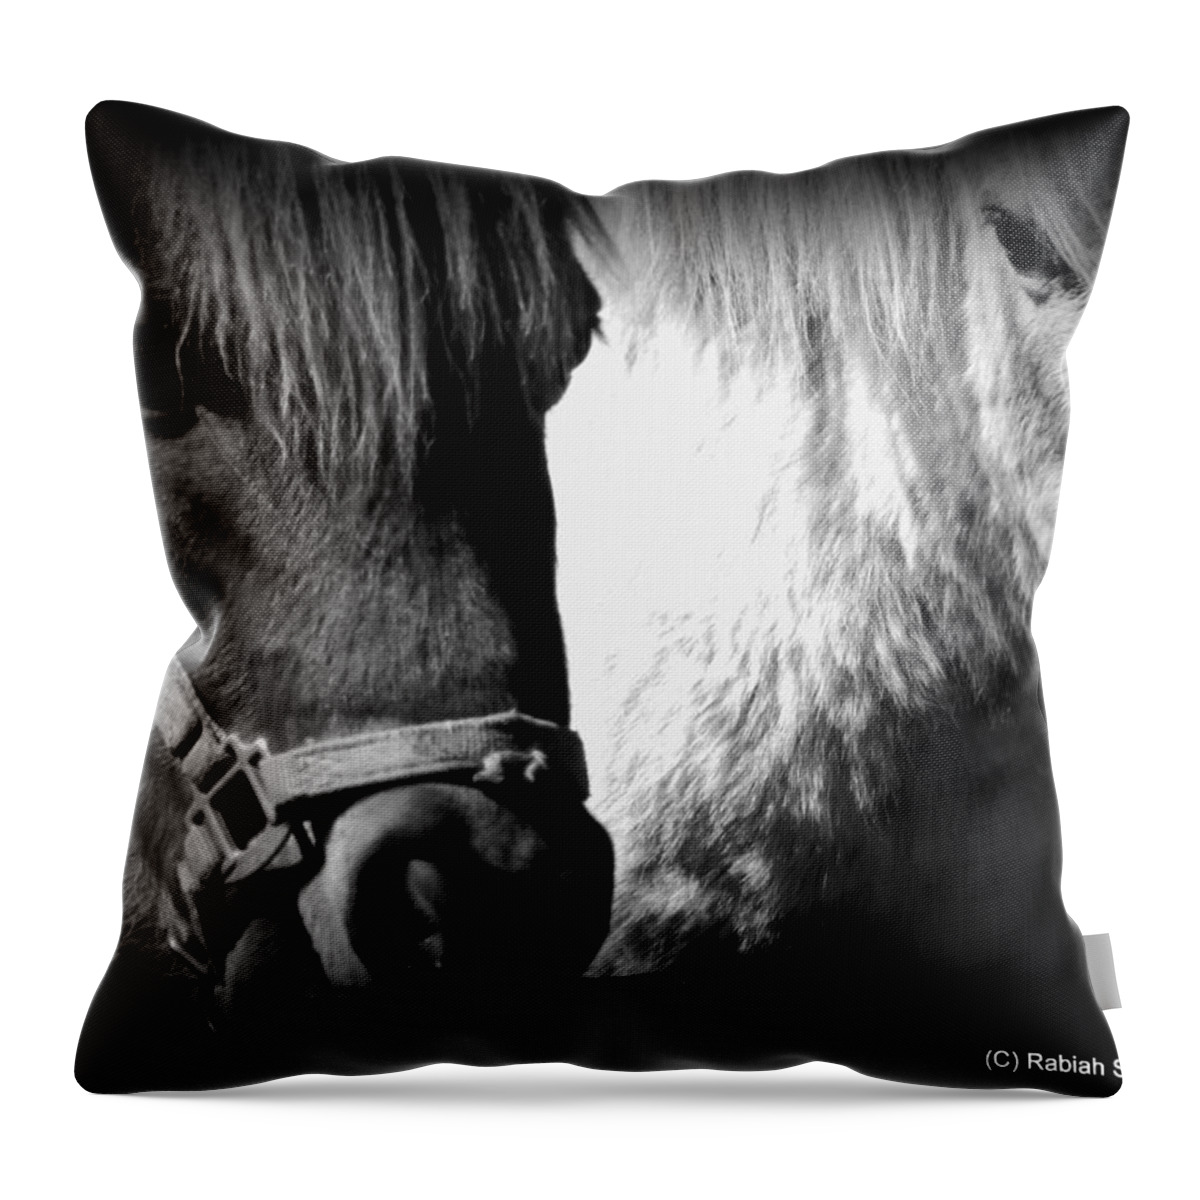 Horses Throw Pillow featuring the photograph The Boyz by Rabiah Seminole